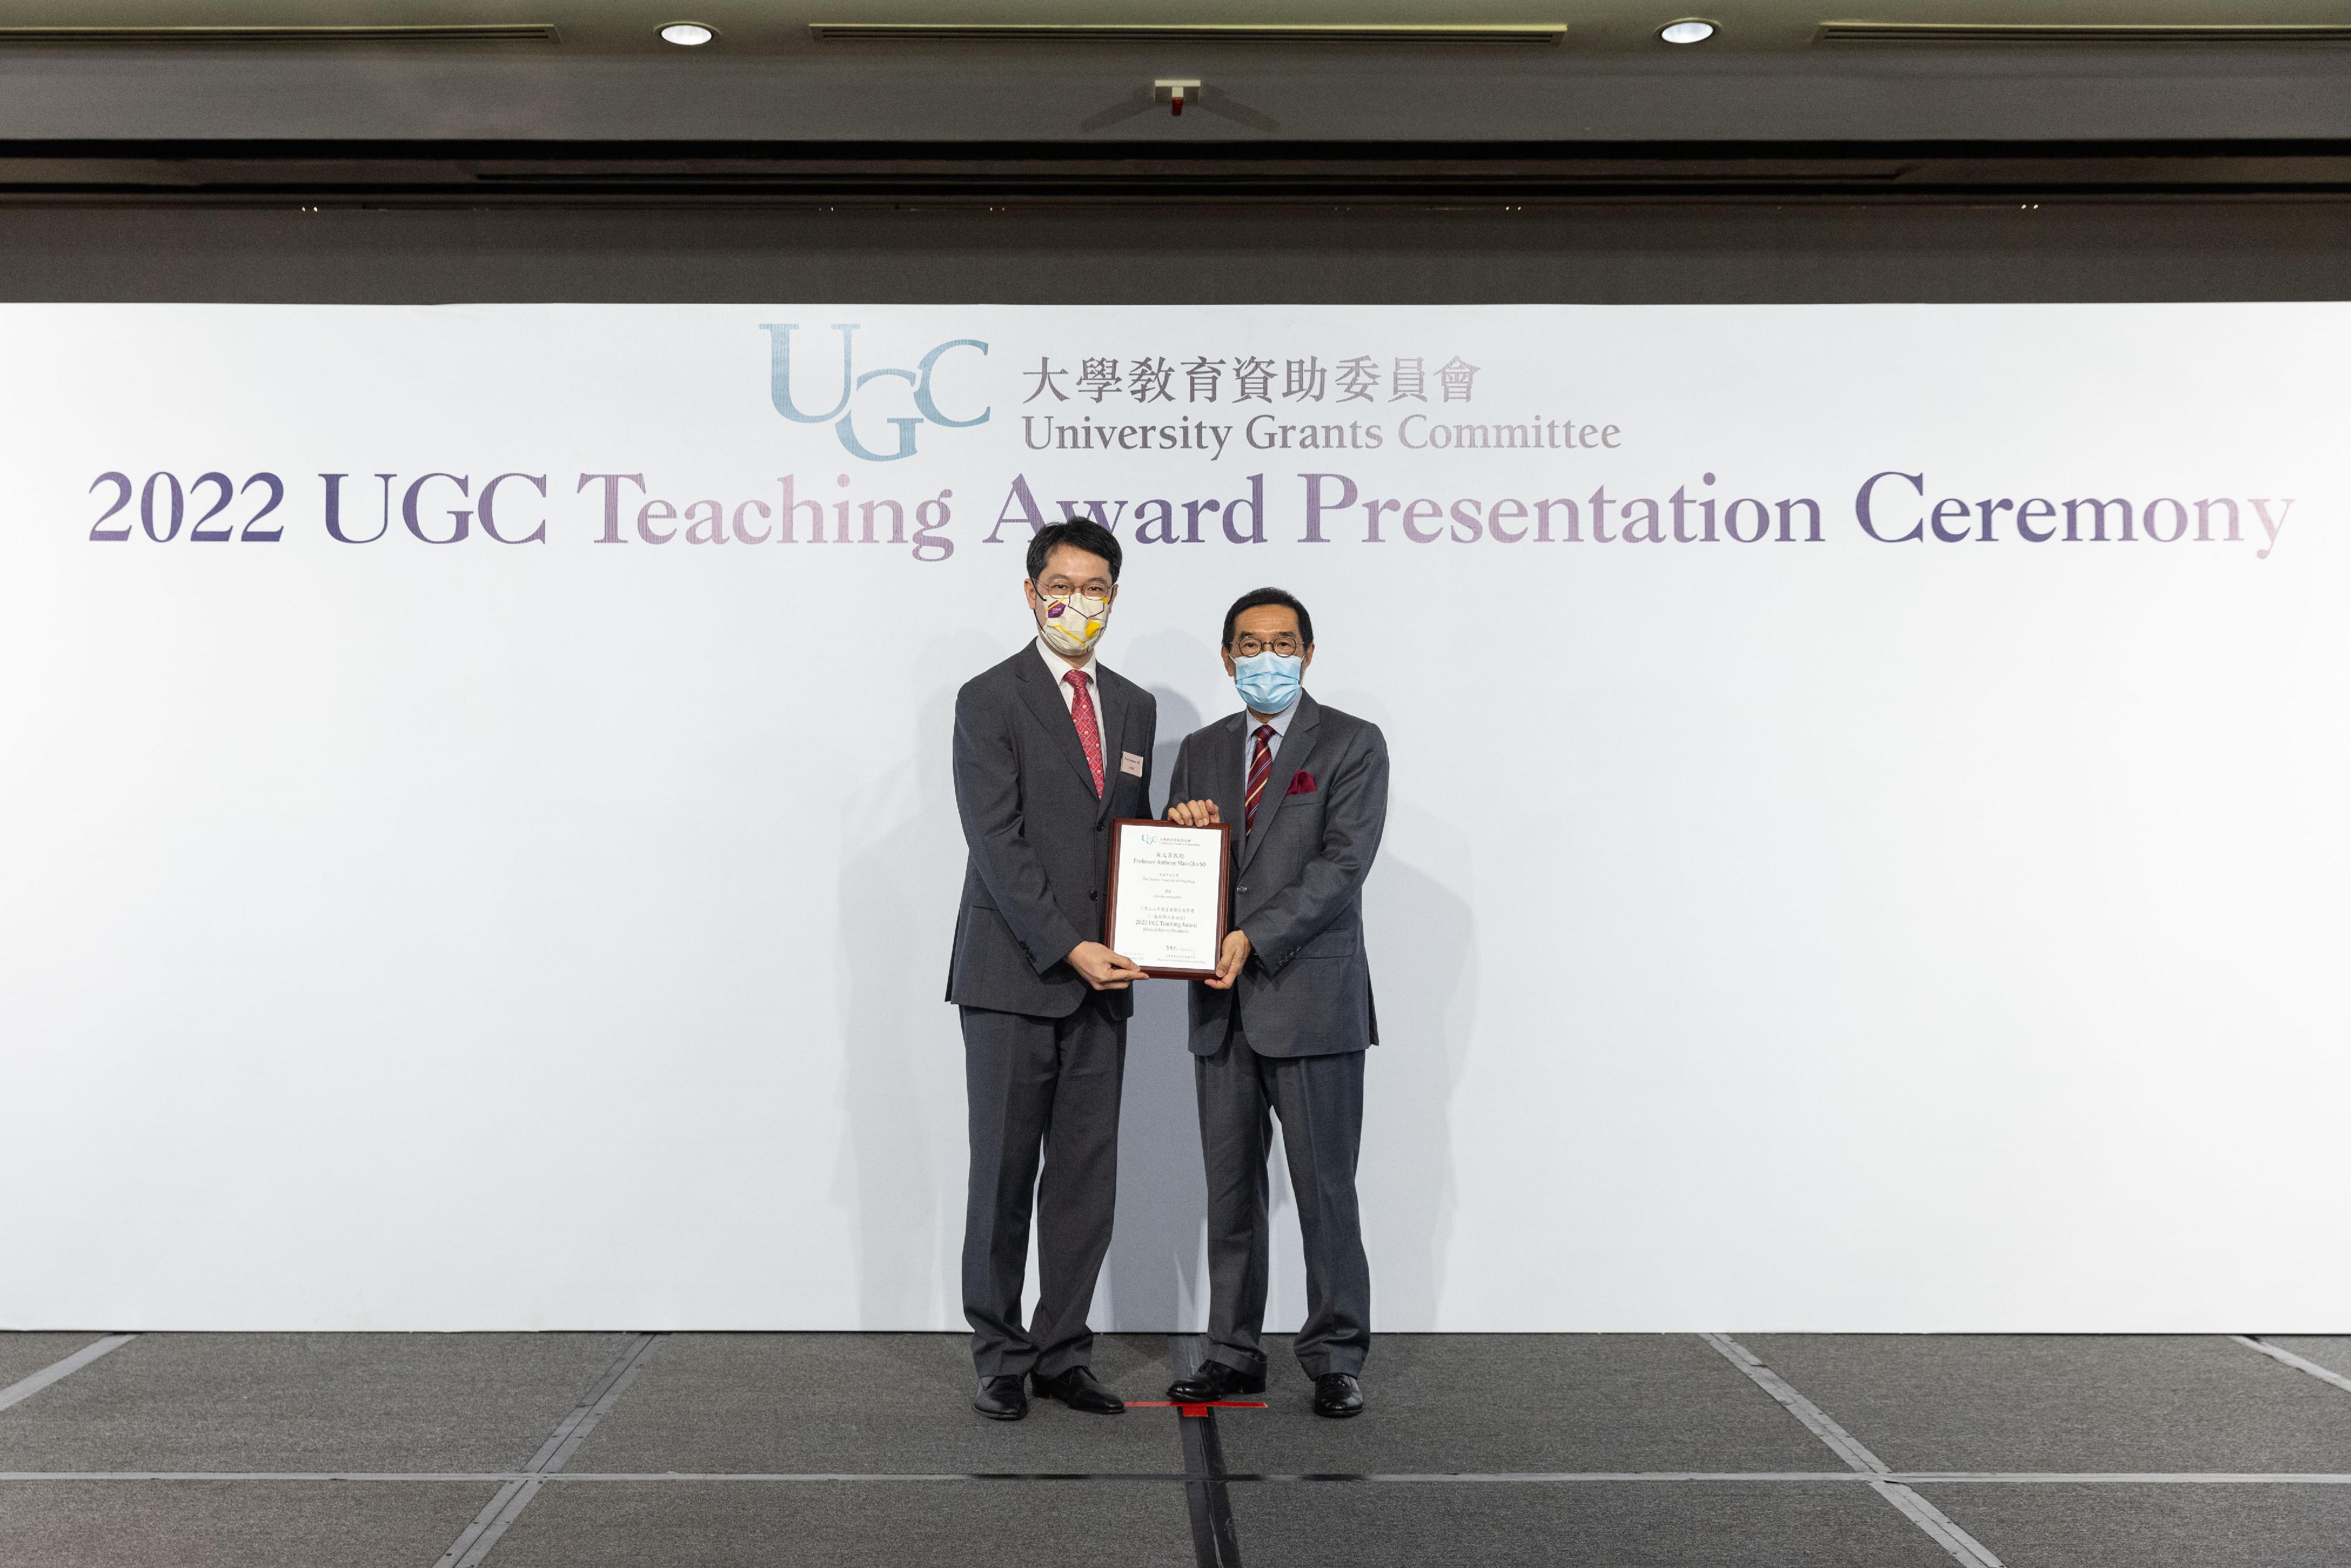 The Chairman of the University Grants Committee (UGC), Mr Carlson Tong (right), presents the 2022 UGC Teaching Award for General Faculty Members to Professor Anthony So Man-cho.